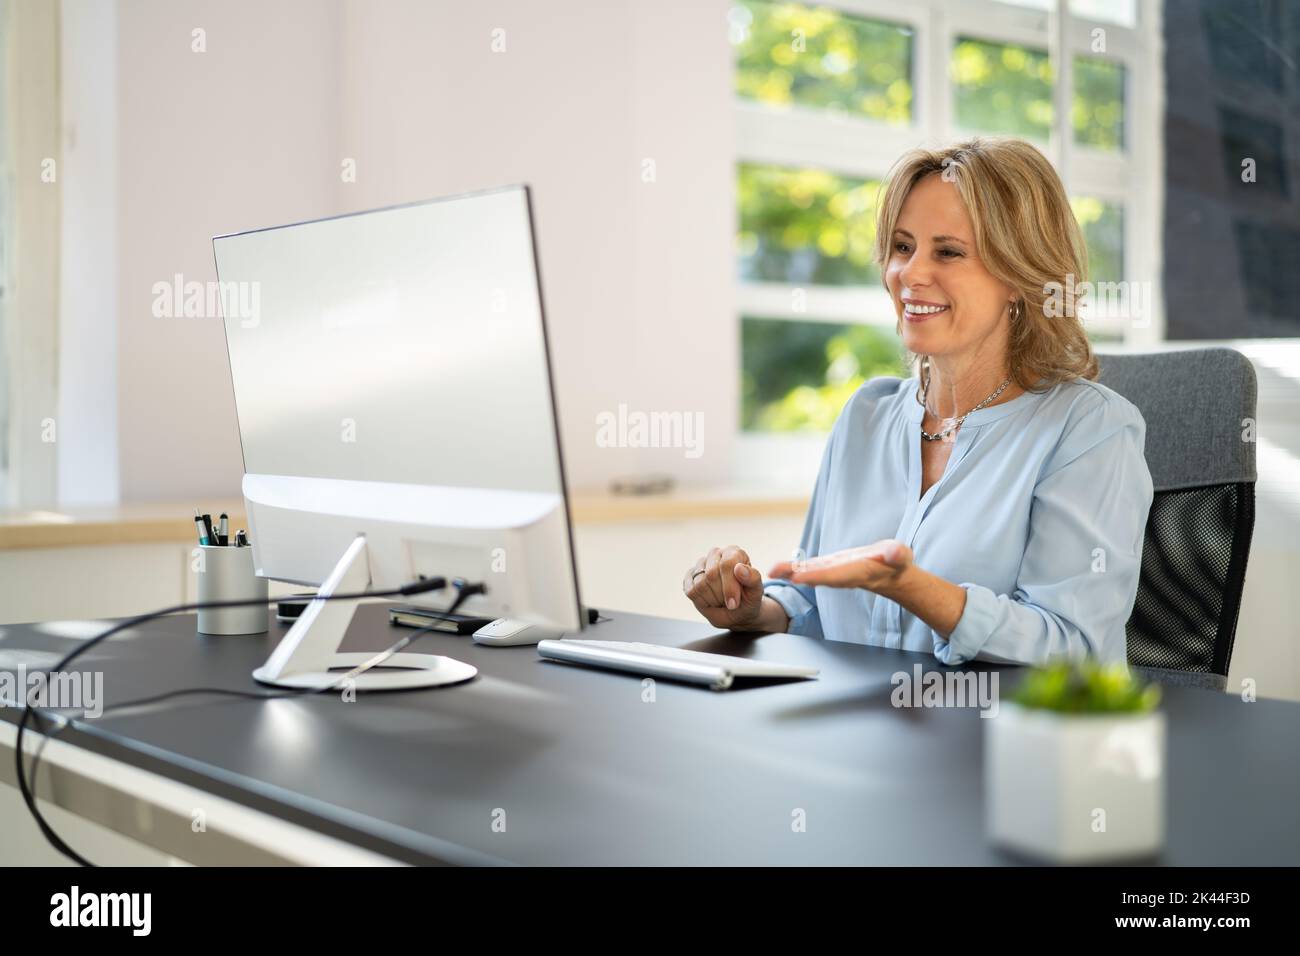 Online Virtual Training Webinar Conference On Computer Stock Photo